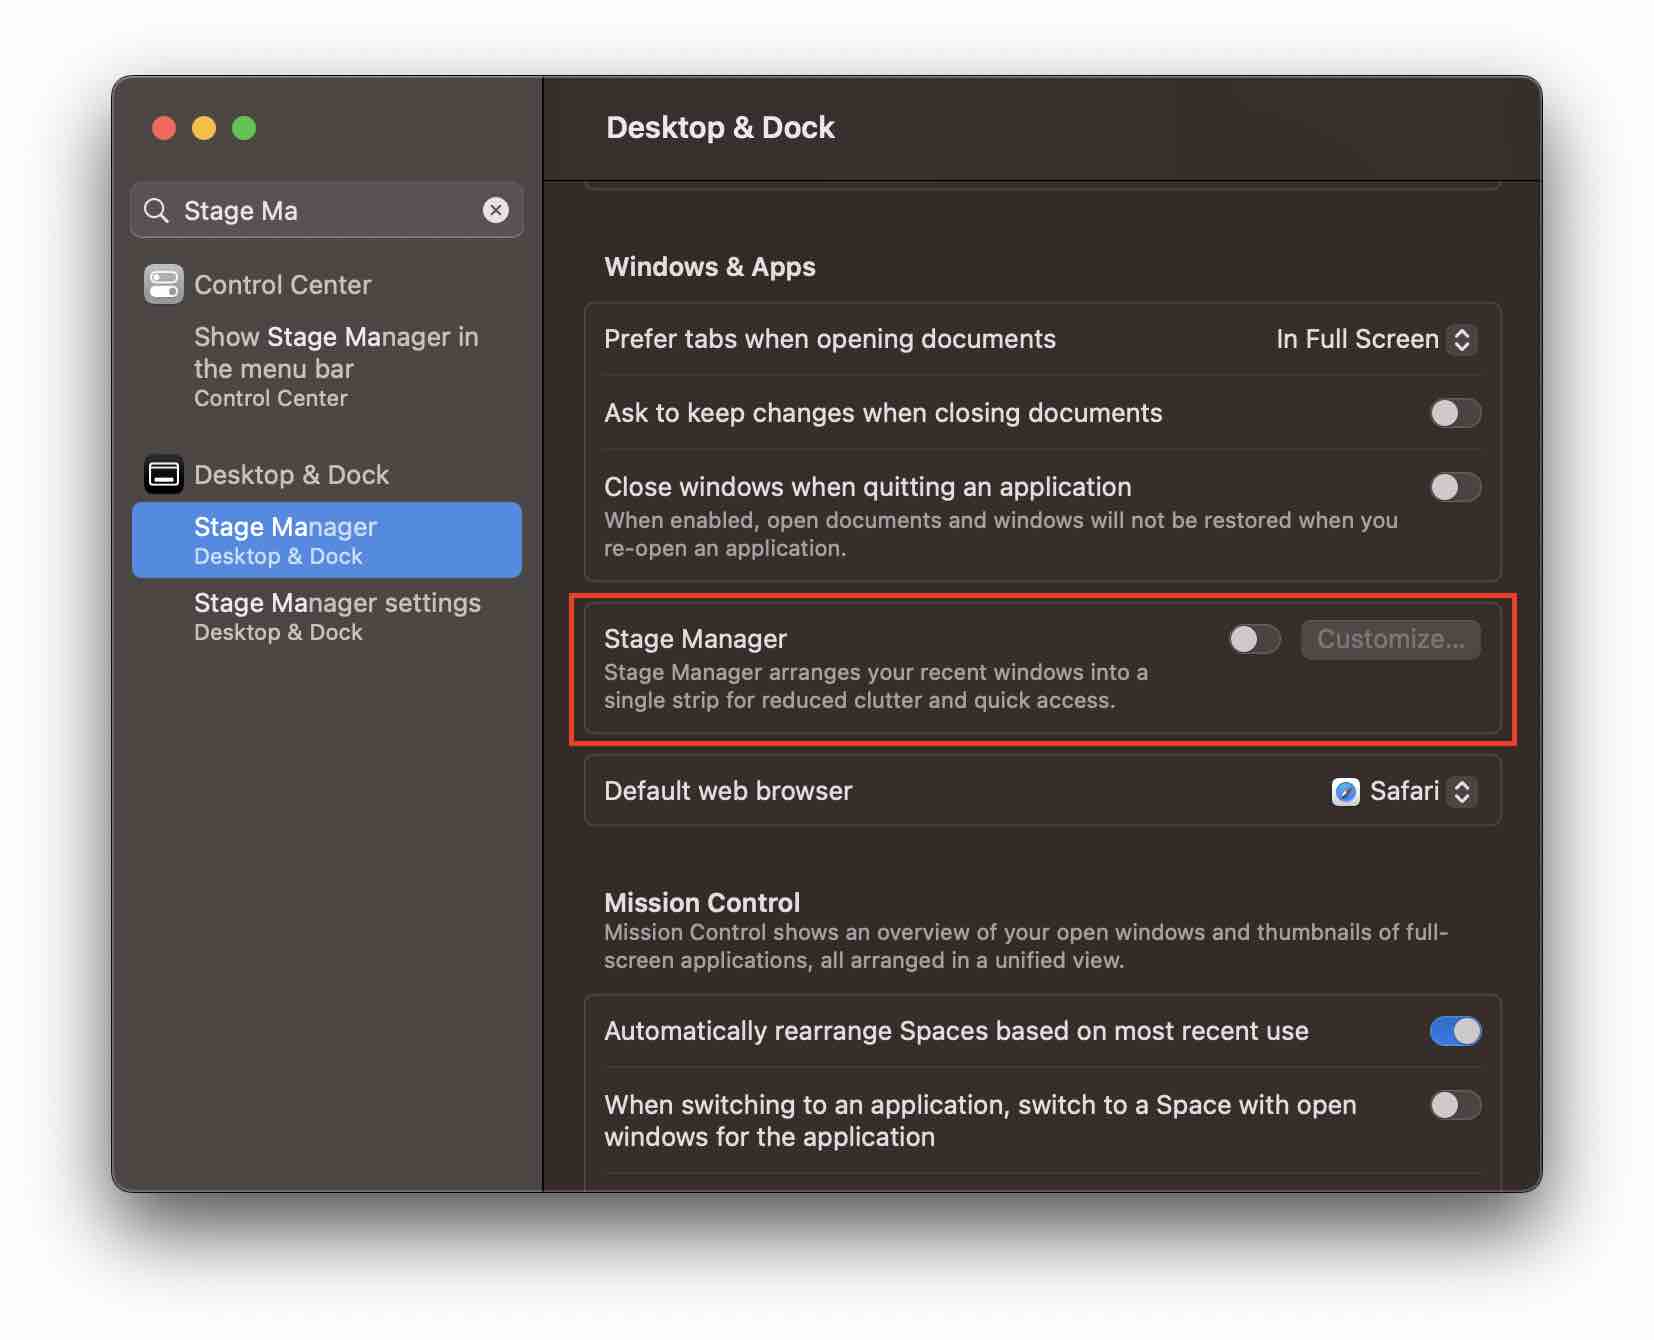 Turn off Stage Manager in System Settings - Desktop & Dock